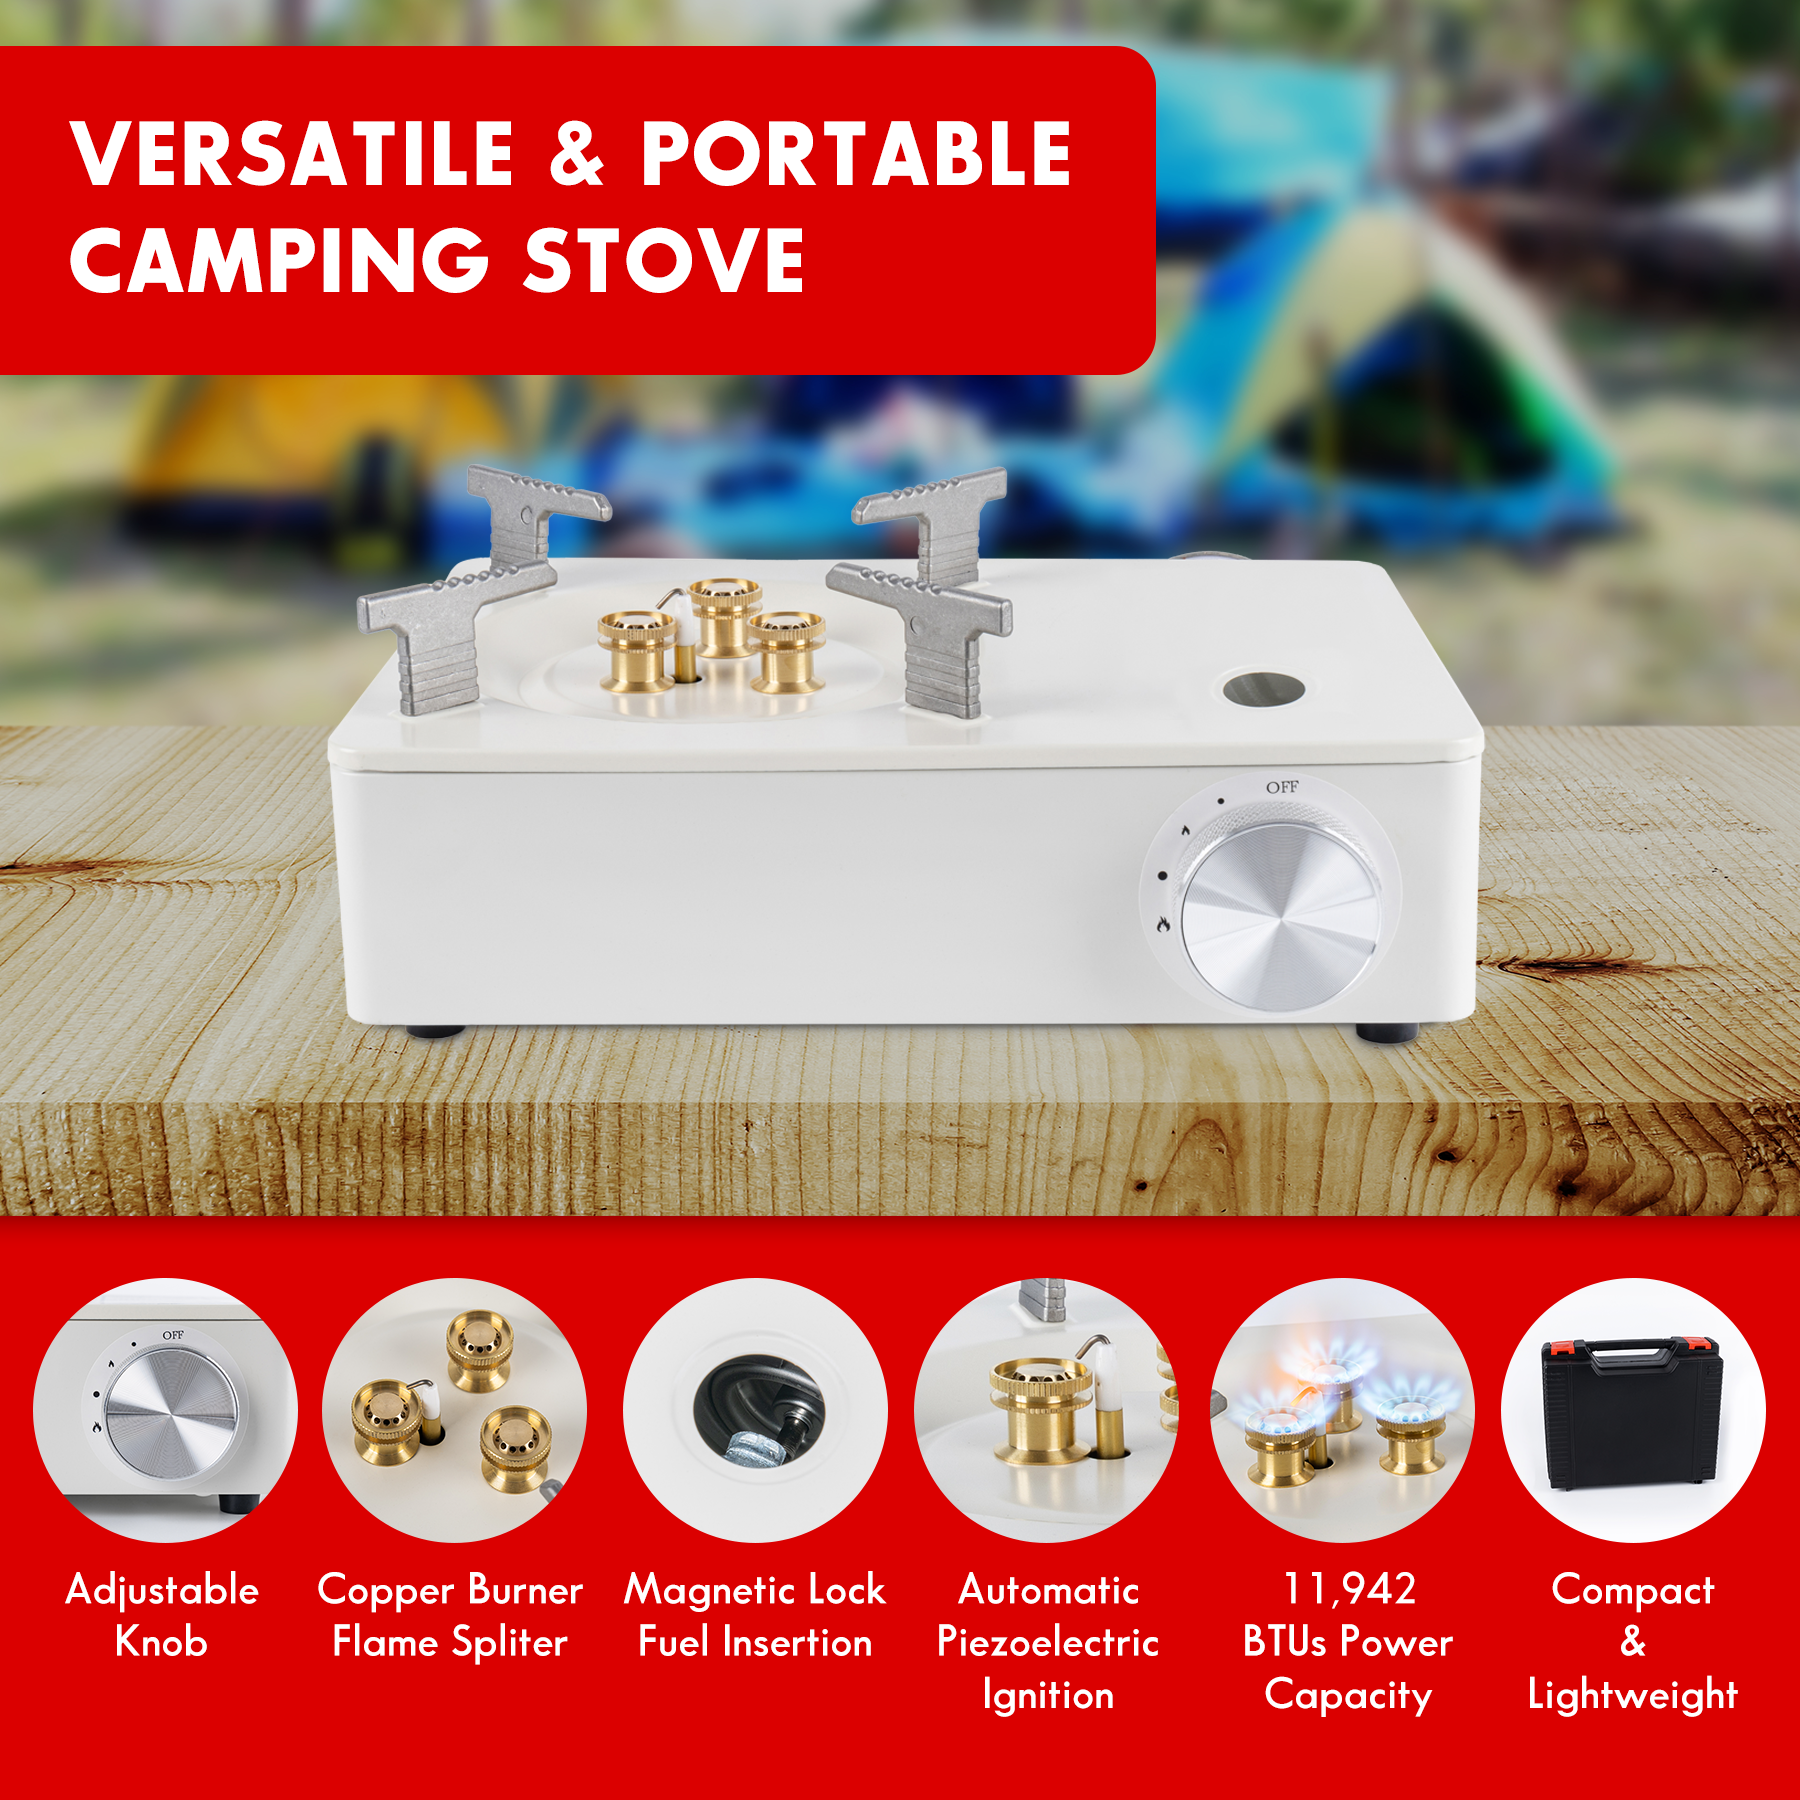 camping stove and its features: adjustable knob, copper burner flame splitter, magnetic lock fuel insertion, automatic piezoelectric ignition, 11,942 BTUs power capacity, compact and lightweight